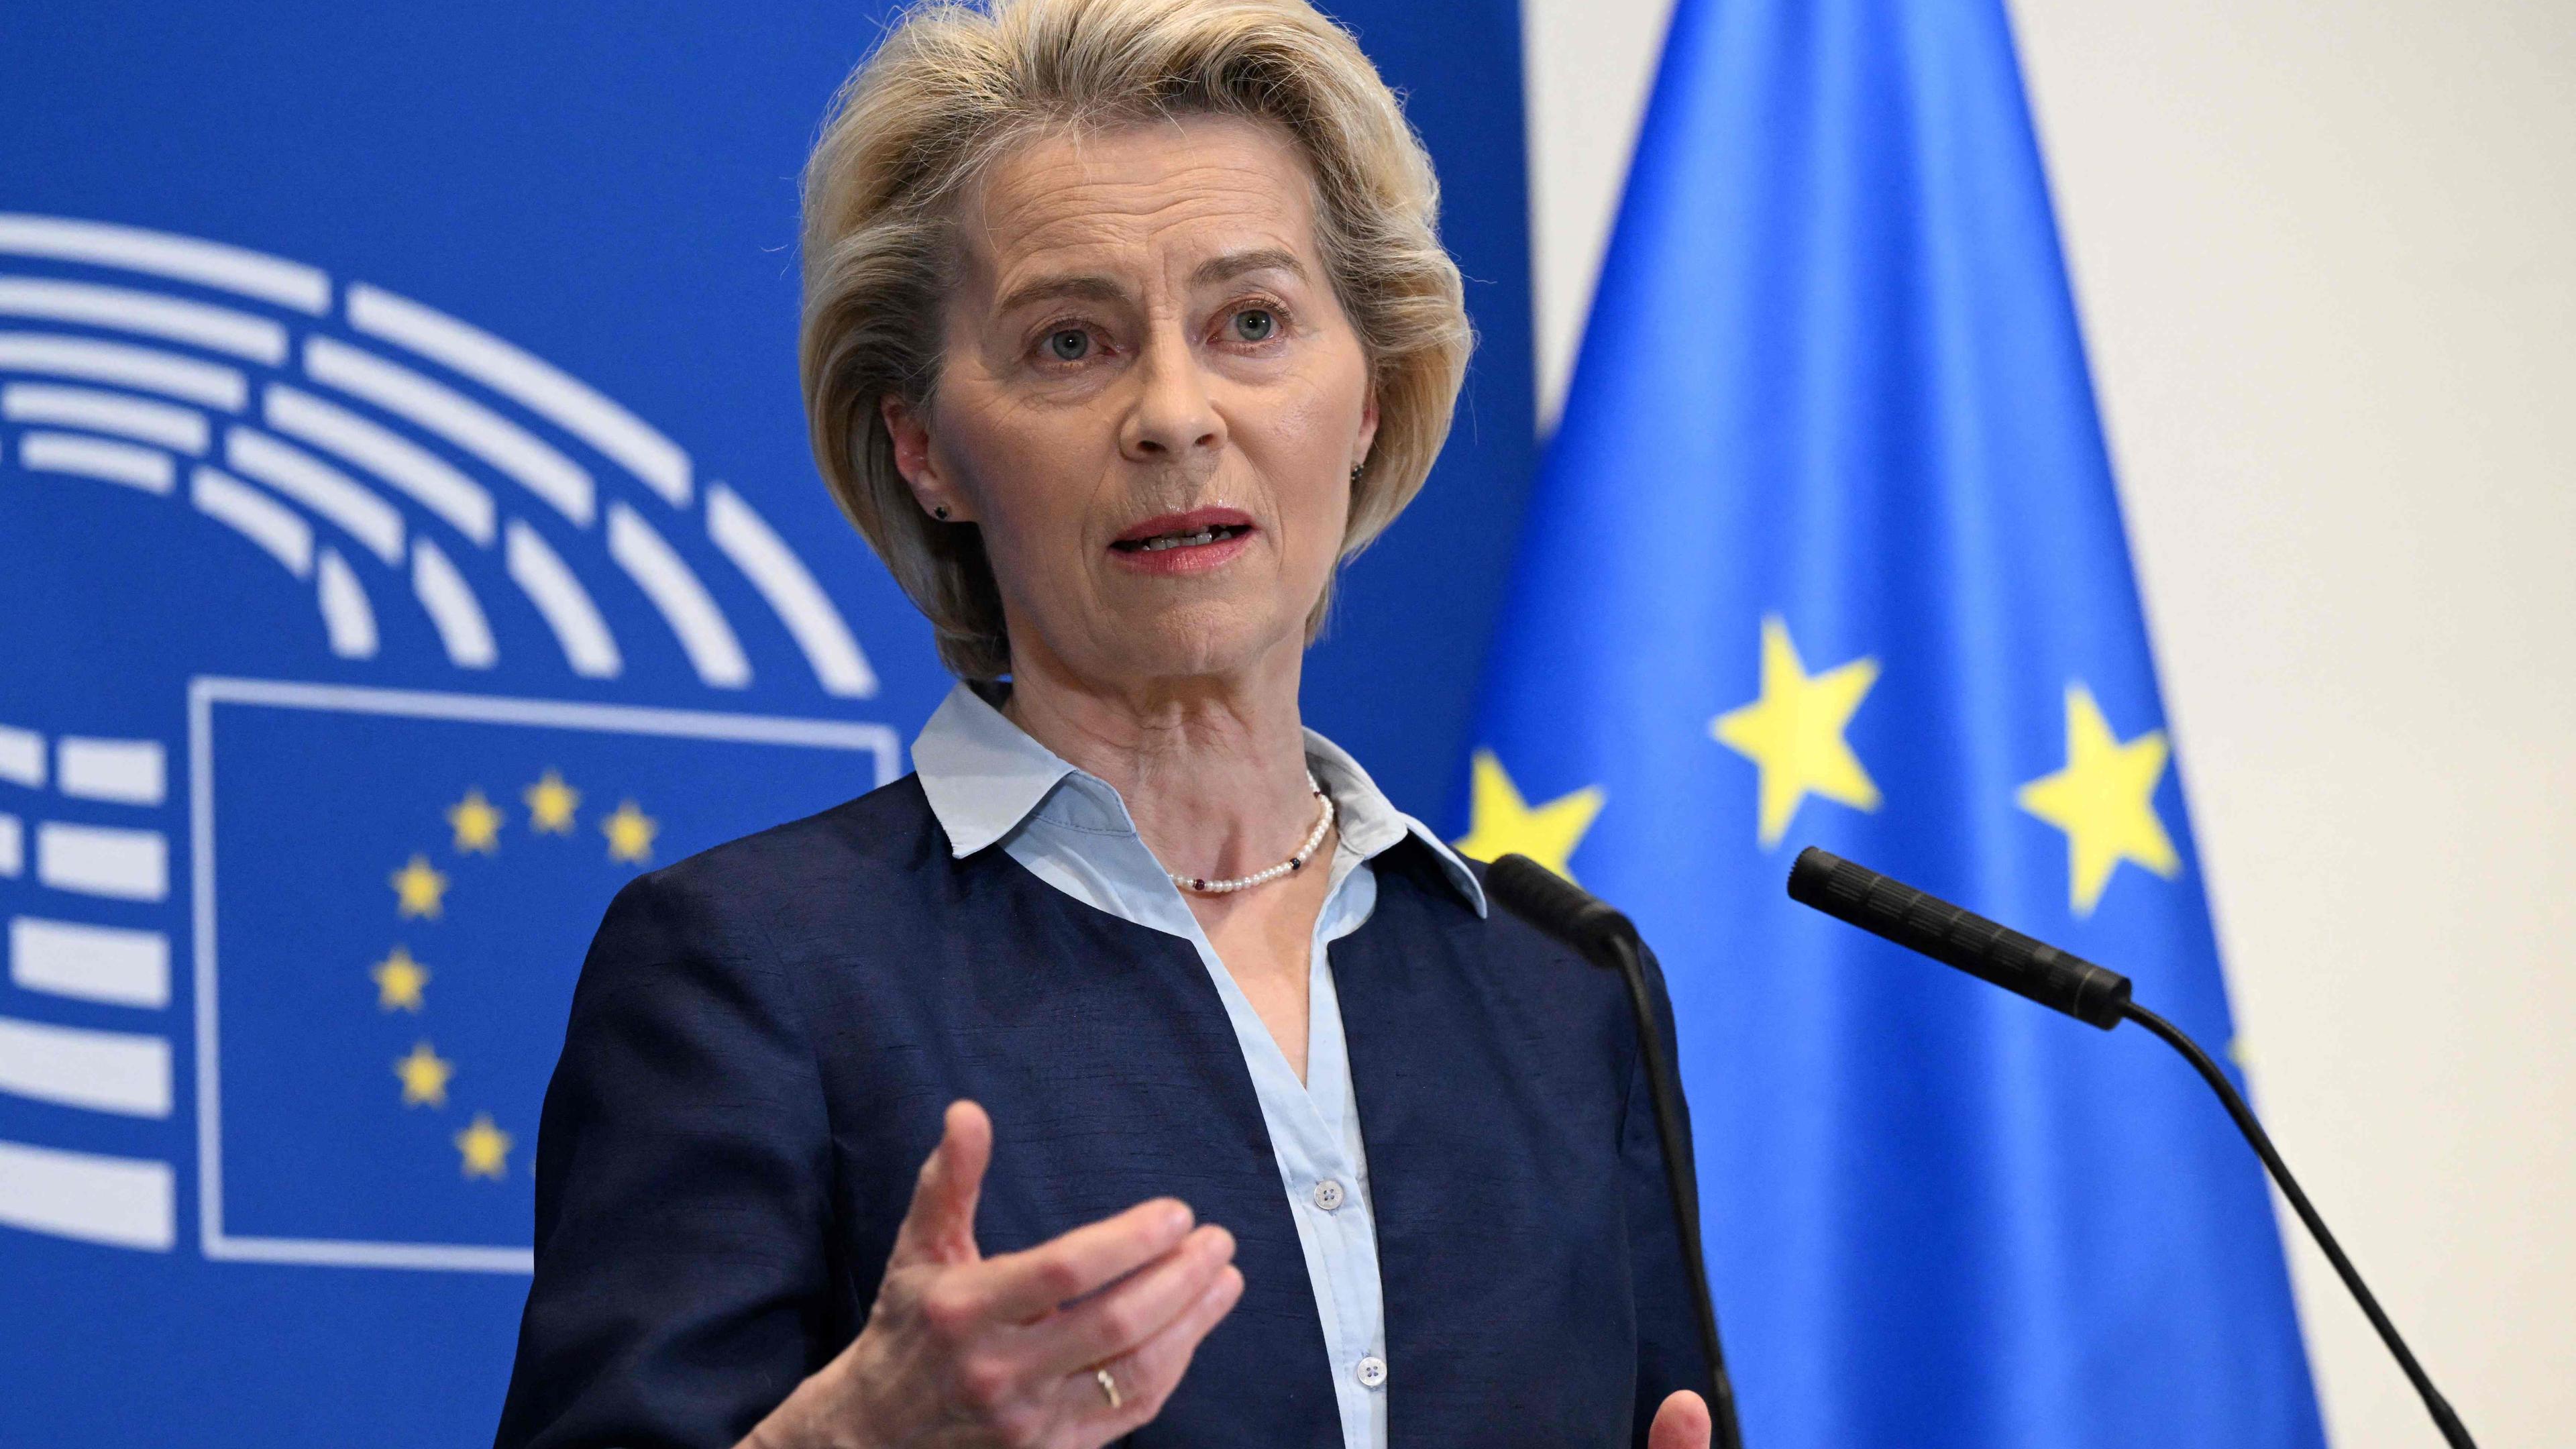 European Commission President Ursula von der Leyen participates in a media conference at the European Parliament in Brussels, on 10 April 10